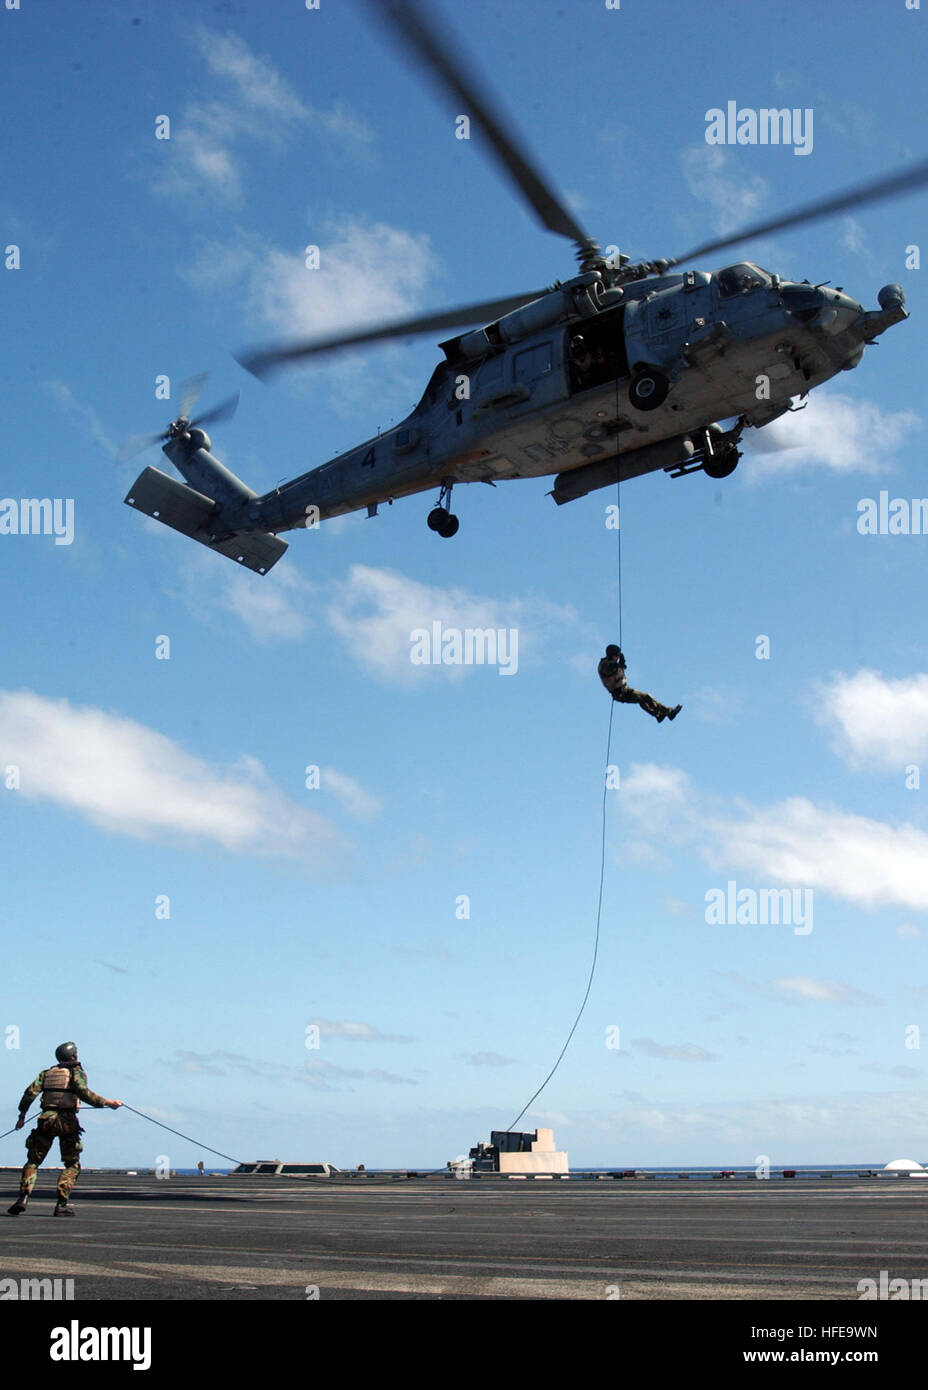 050214-N-7265L-015 Pacific Ocean (Feb. 14, 2005) Ð Sailors assigned to Explosive Ordnance Disposal Mobile Unit Eleven (EODMU-11), Detachment Nine, fast rope from an HH-60H Seahawk helicopter to the flight deck aboard the Nimitz-class aircraft carrier USS Carl Vinson (CVN 70) during an exercise. Carl Vinson is on a scheduled deployment and will arrive in Norfolk, Va., upon completion of her deployment to prepare her for refueling and a complex overhaul. U.S. Navy photo by Photographer's Mate 2nd Class Inez Lawson (RELEASED) US Navy 050214-N-7265L-015 Sailors assigned to Explosive Ordnance Dispo Stock Photo